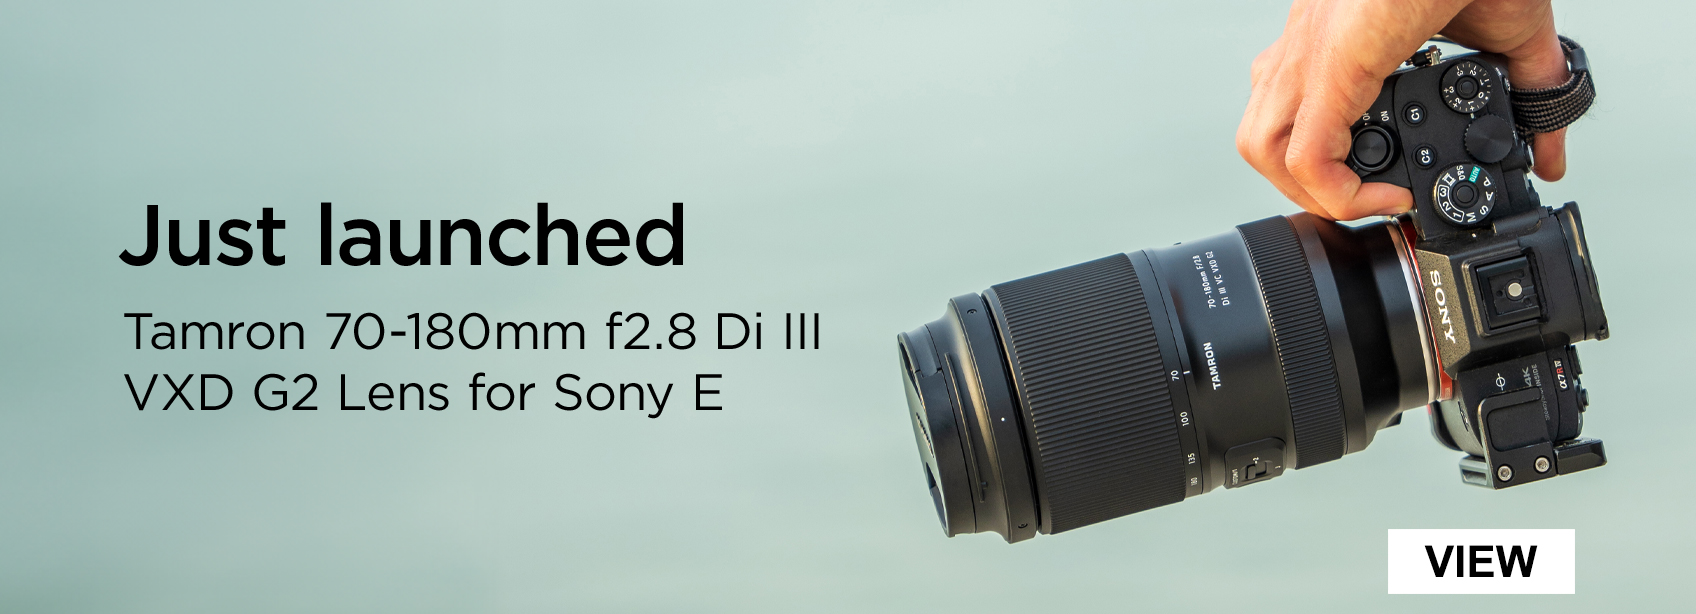 Just launched. Tamron 70-180mm f2.8 Di III VXD G2 lens for sony e